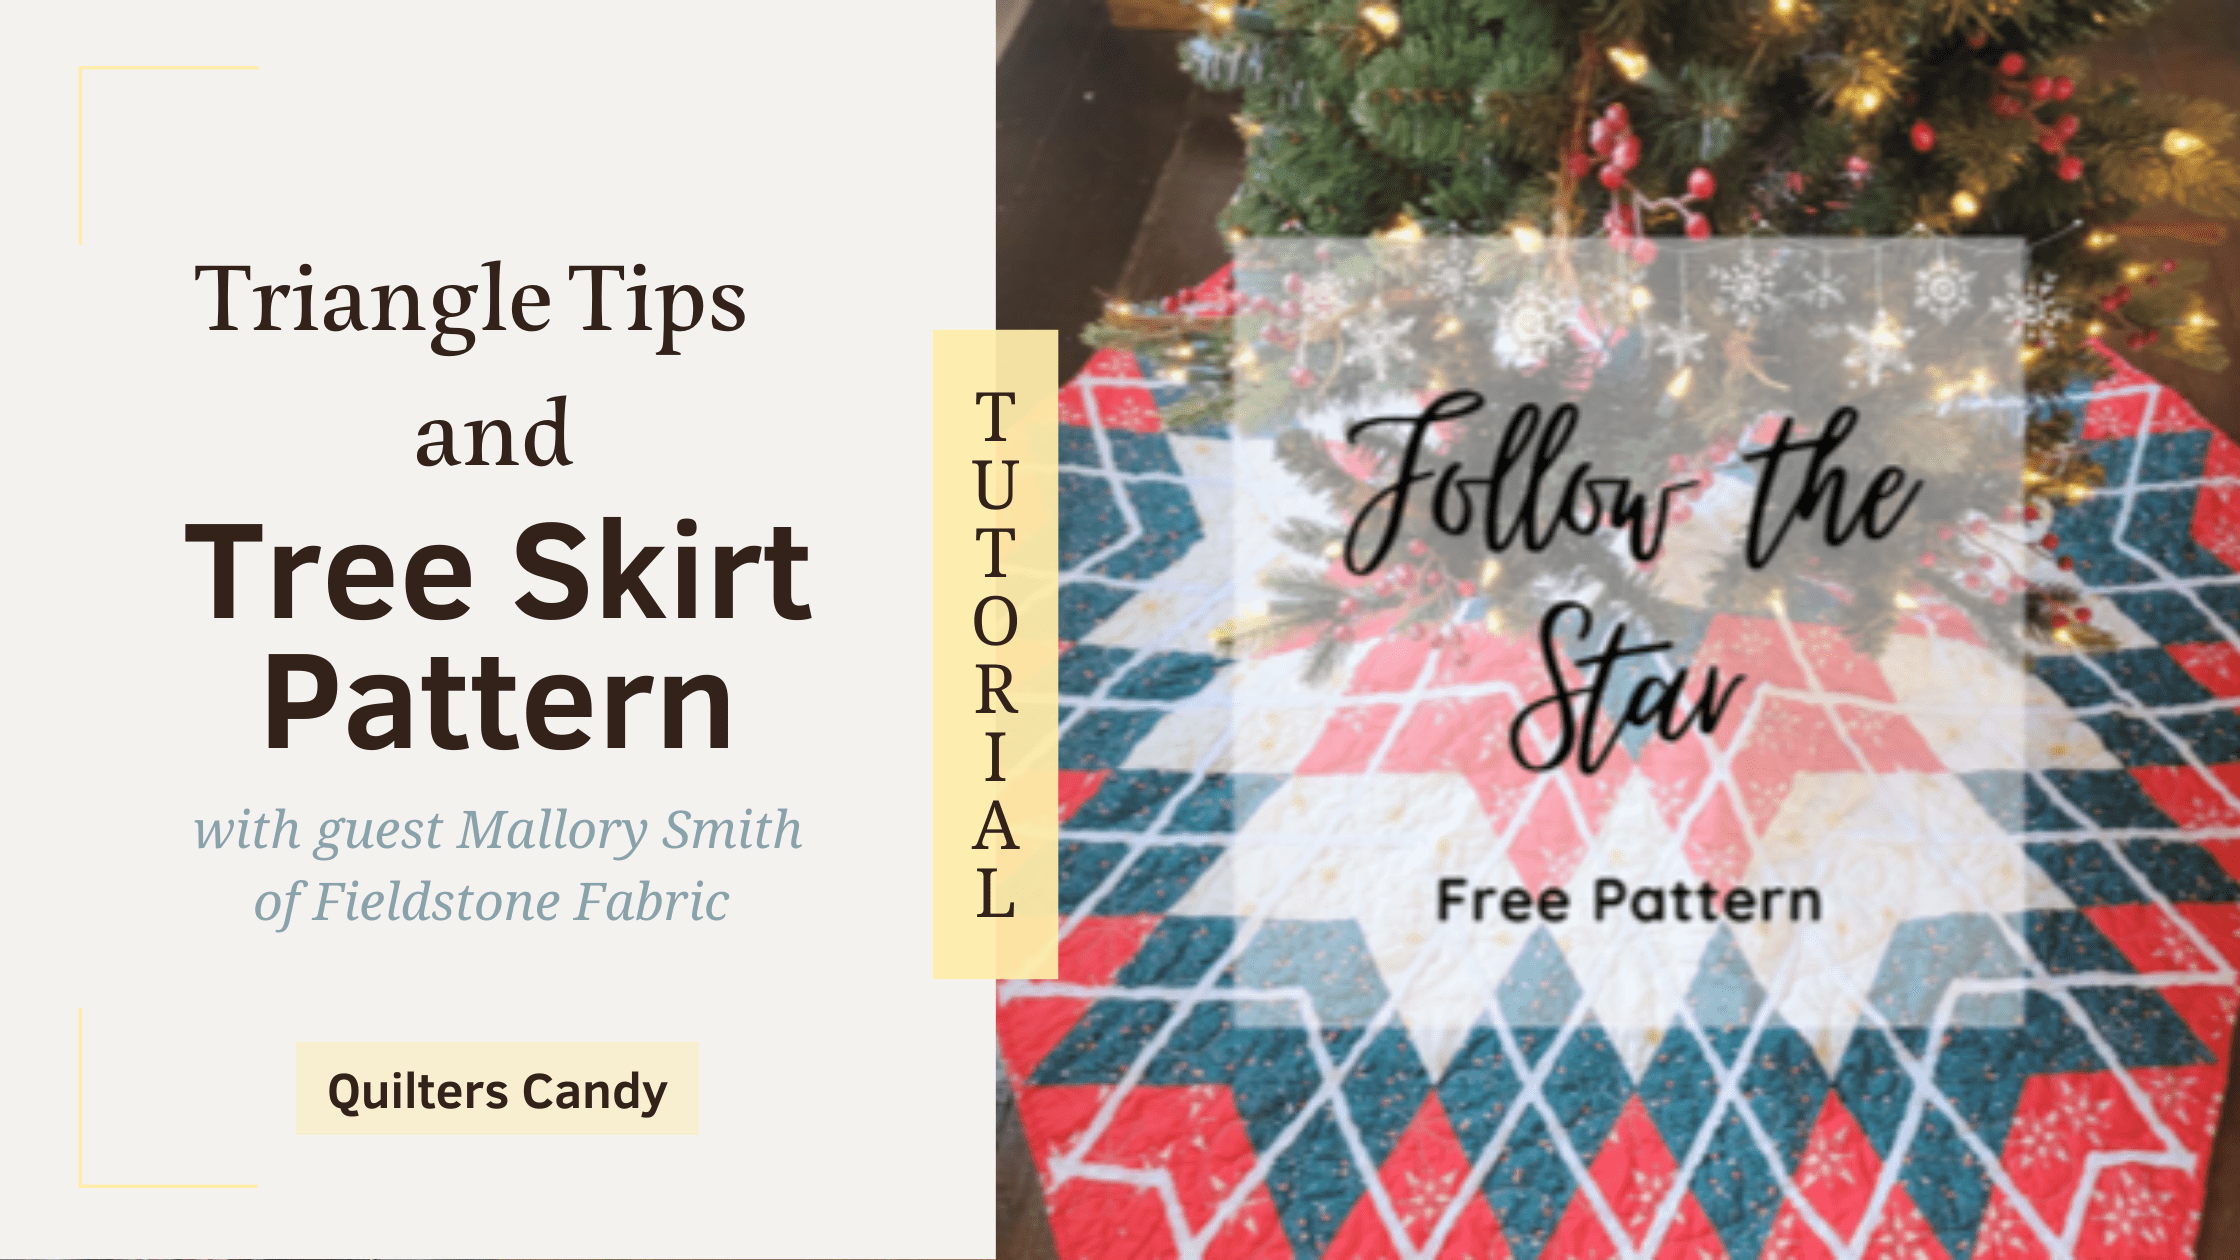 Triangle Tips and Tree Skirt Pattern